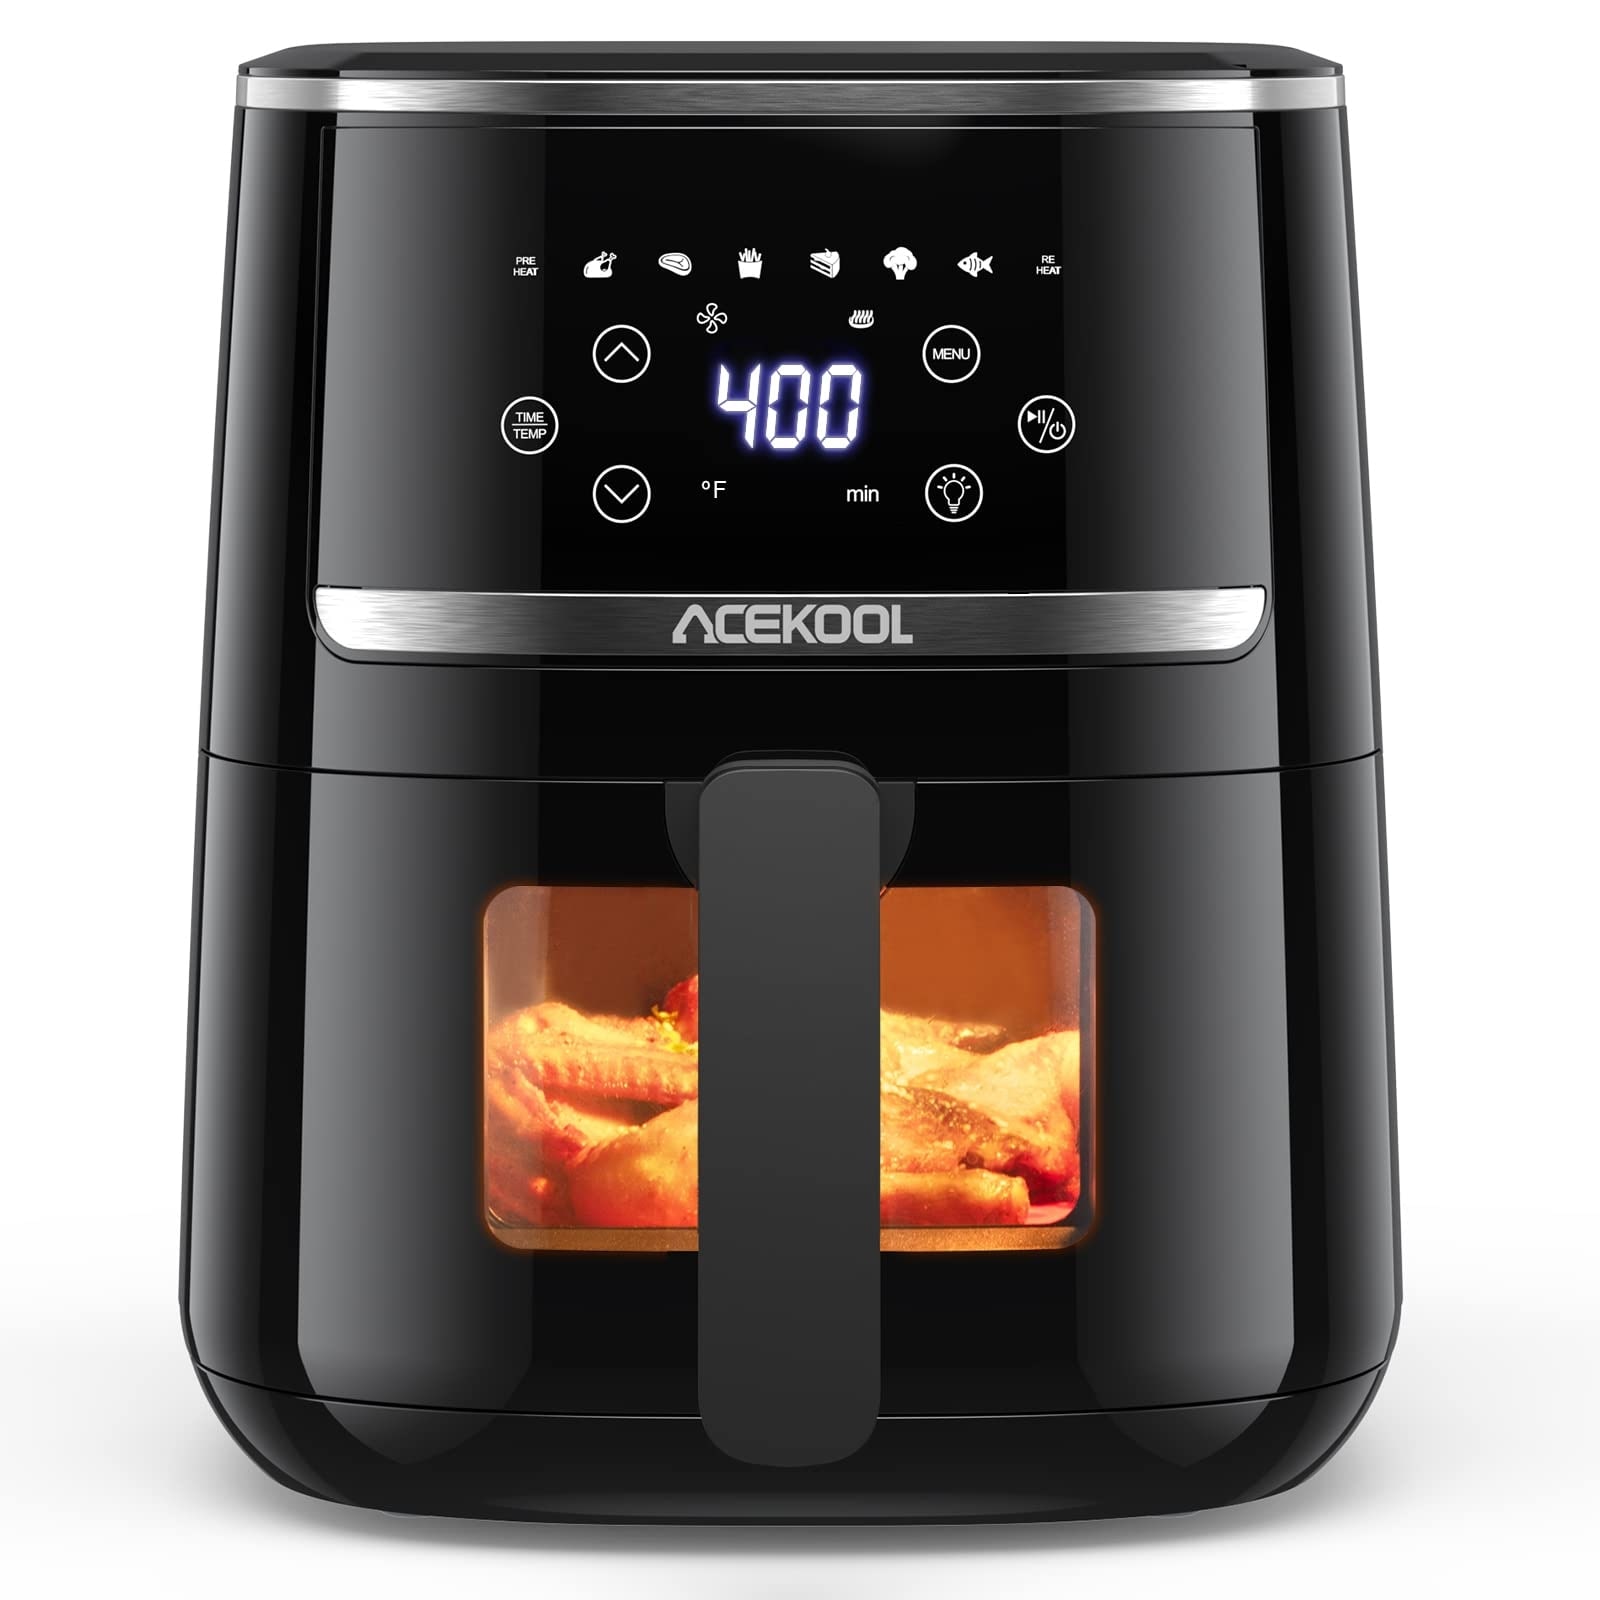 https://ak1.ostkcdn.com/images/products/is/images/direct/c7a1e776888f6cdaa27617cd6ce53bf20dbb6be6/5-Qt-Air-Fryer%2C-Digital-Air-Fryer-Toaster-Oven-Combo-with-8-Cooking-Presets-Oilless-Cooker%2C-UP-to-400%E2%84%89%2C-Basket%2C-Liner%2C-Timer.jpg